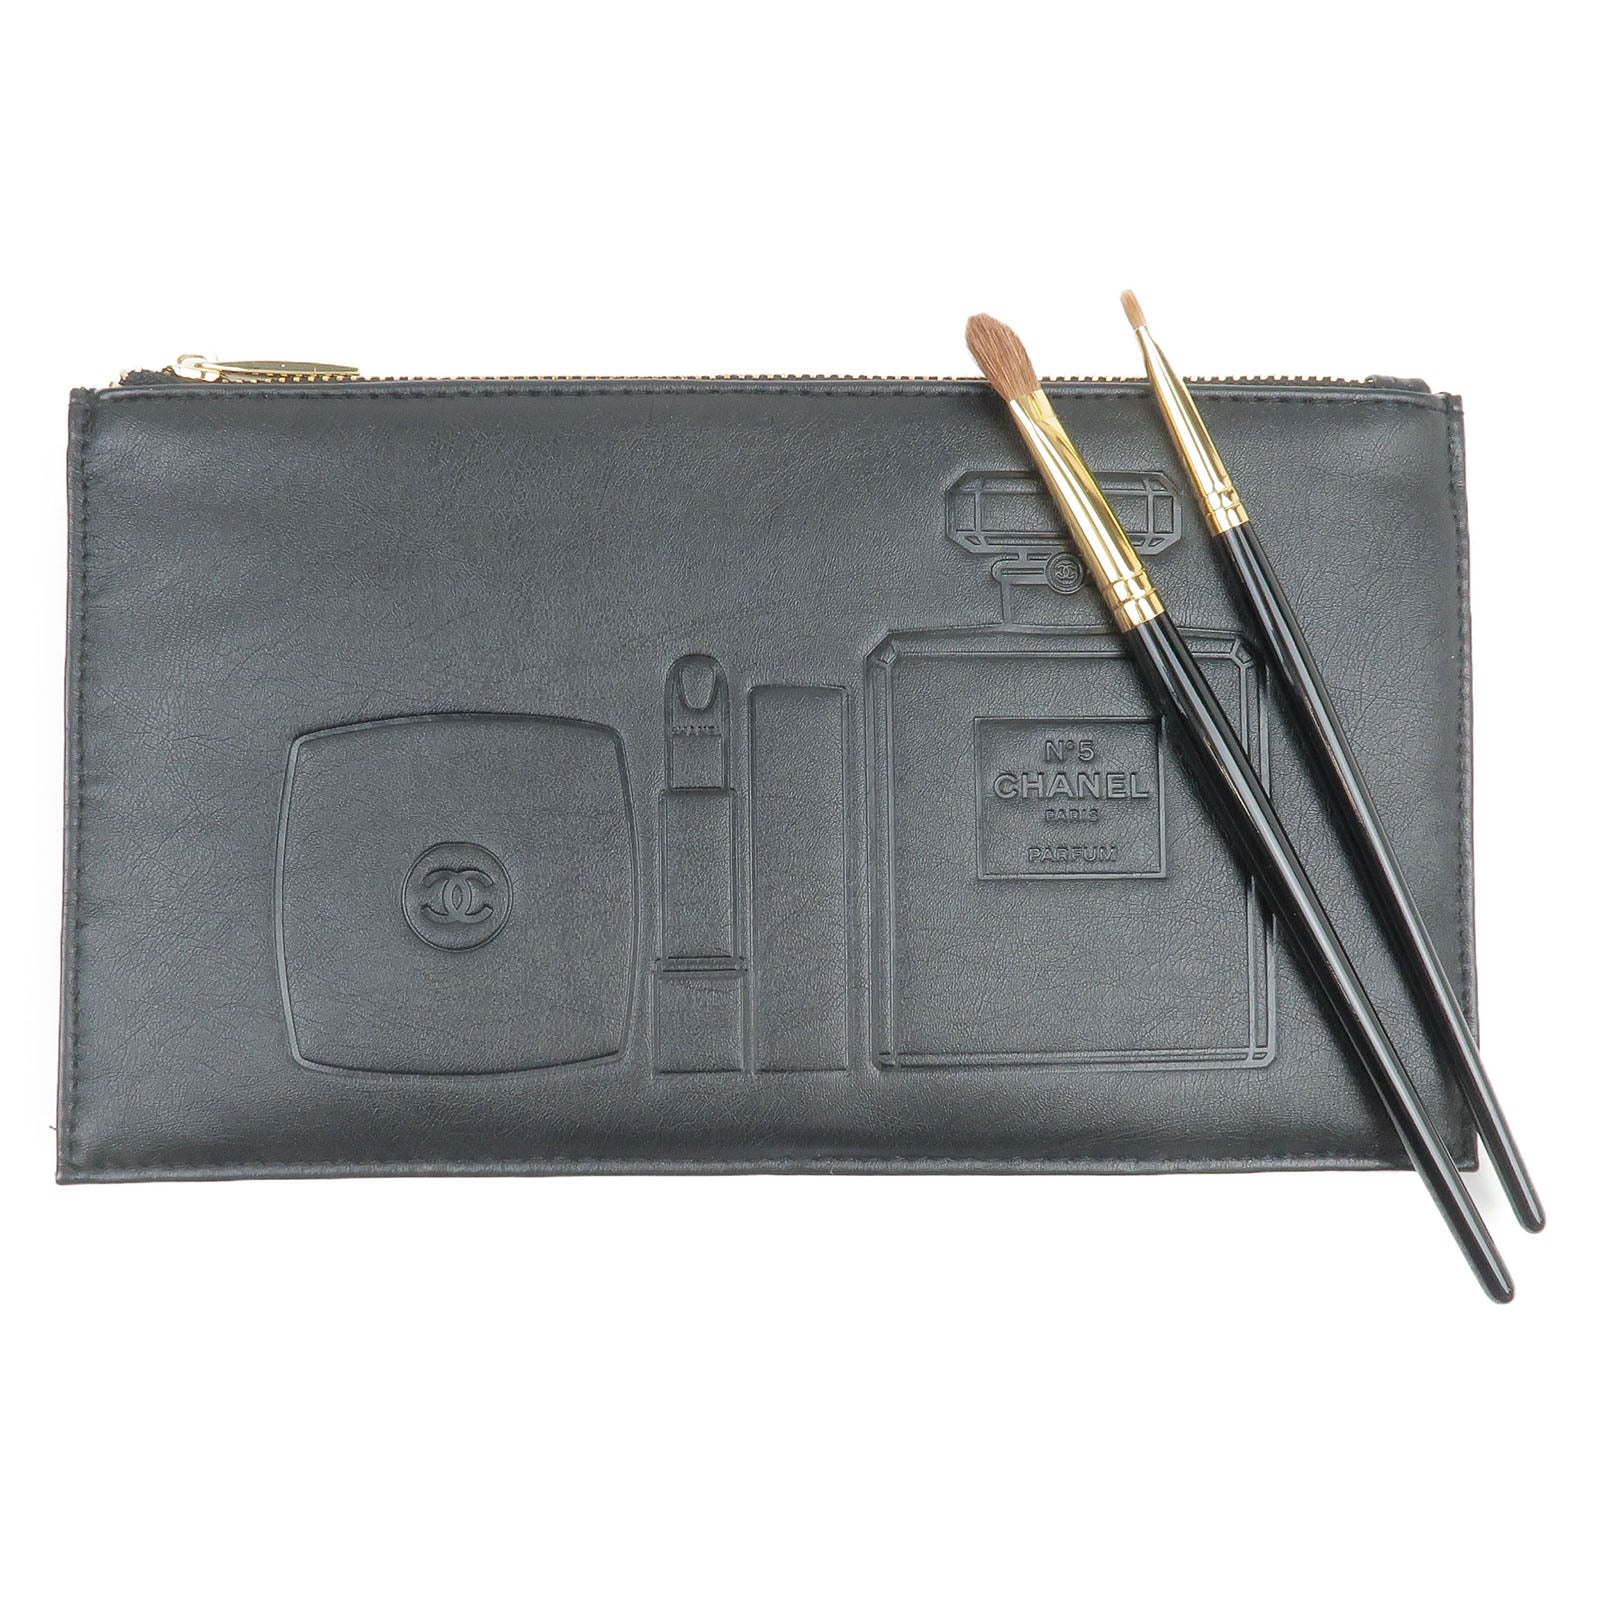 CHANEL-Cosmetic-Pouch-and-Set-of-2-Makeup-Brushes-Black